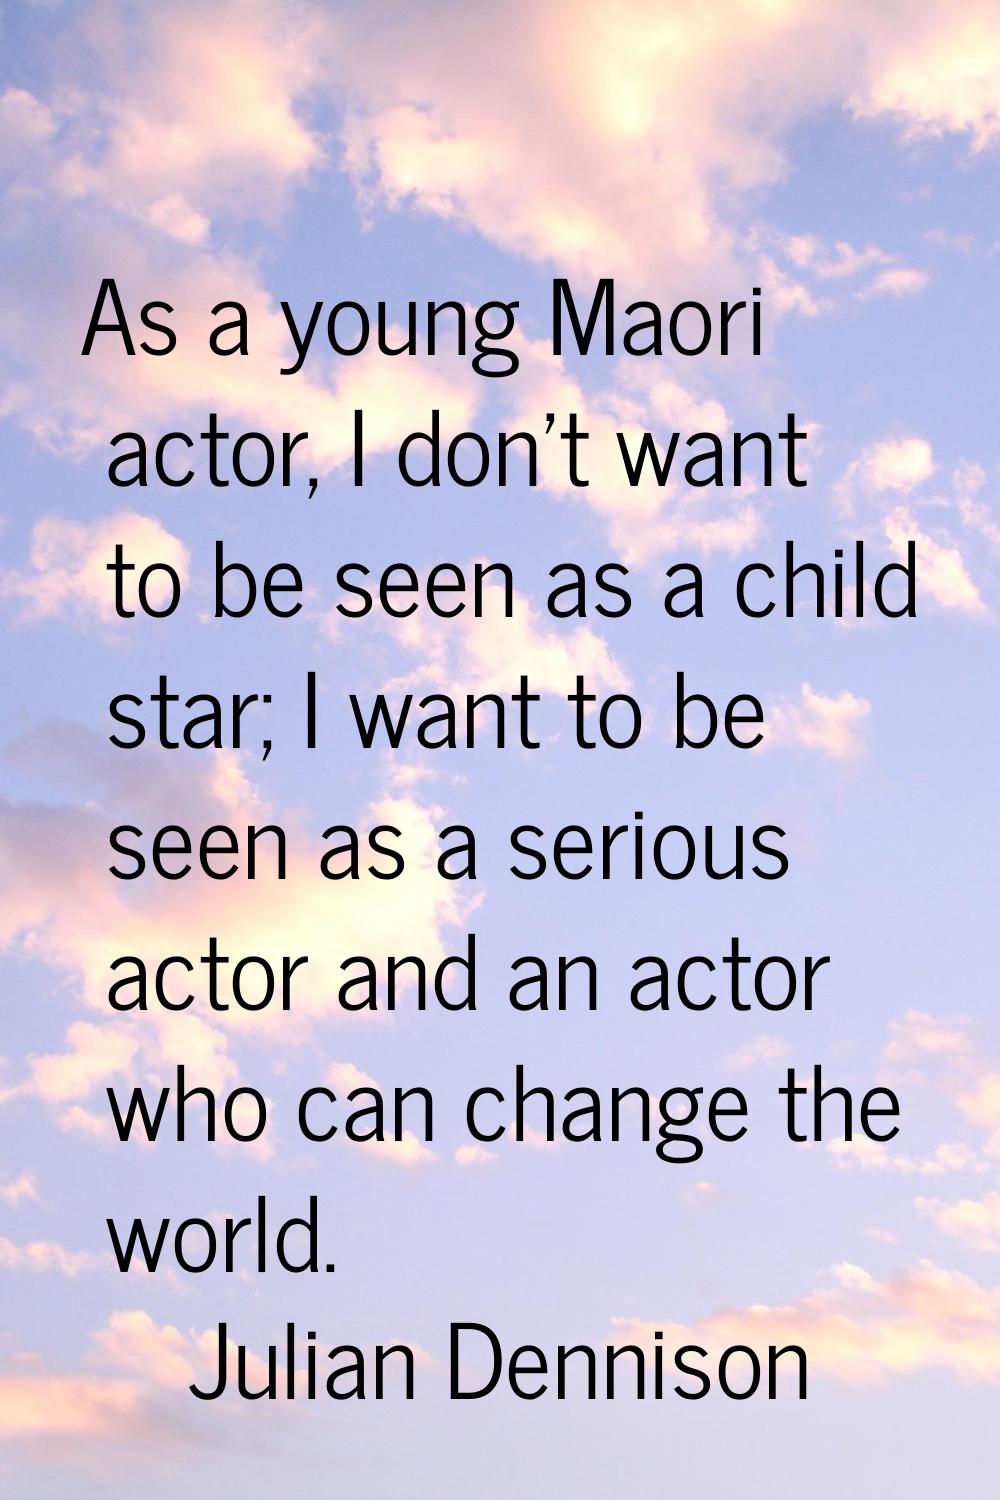 As a young Maori actor, I don't want to be seen as a child star; I want to be seen as a serious act